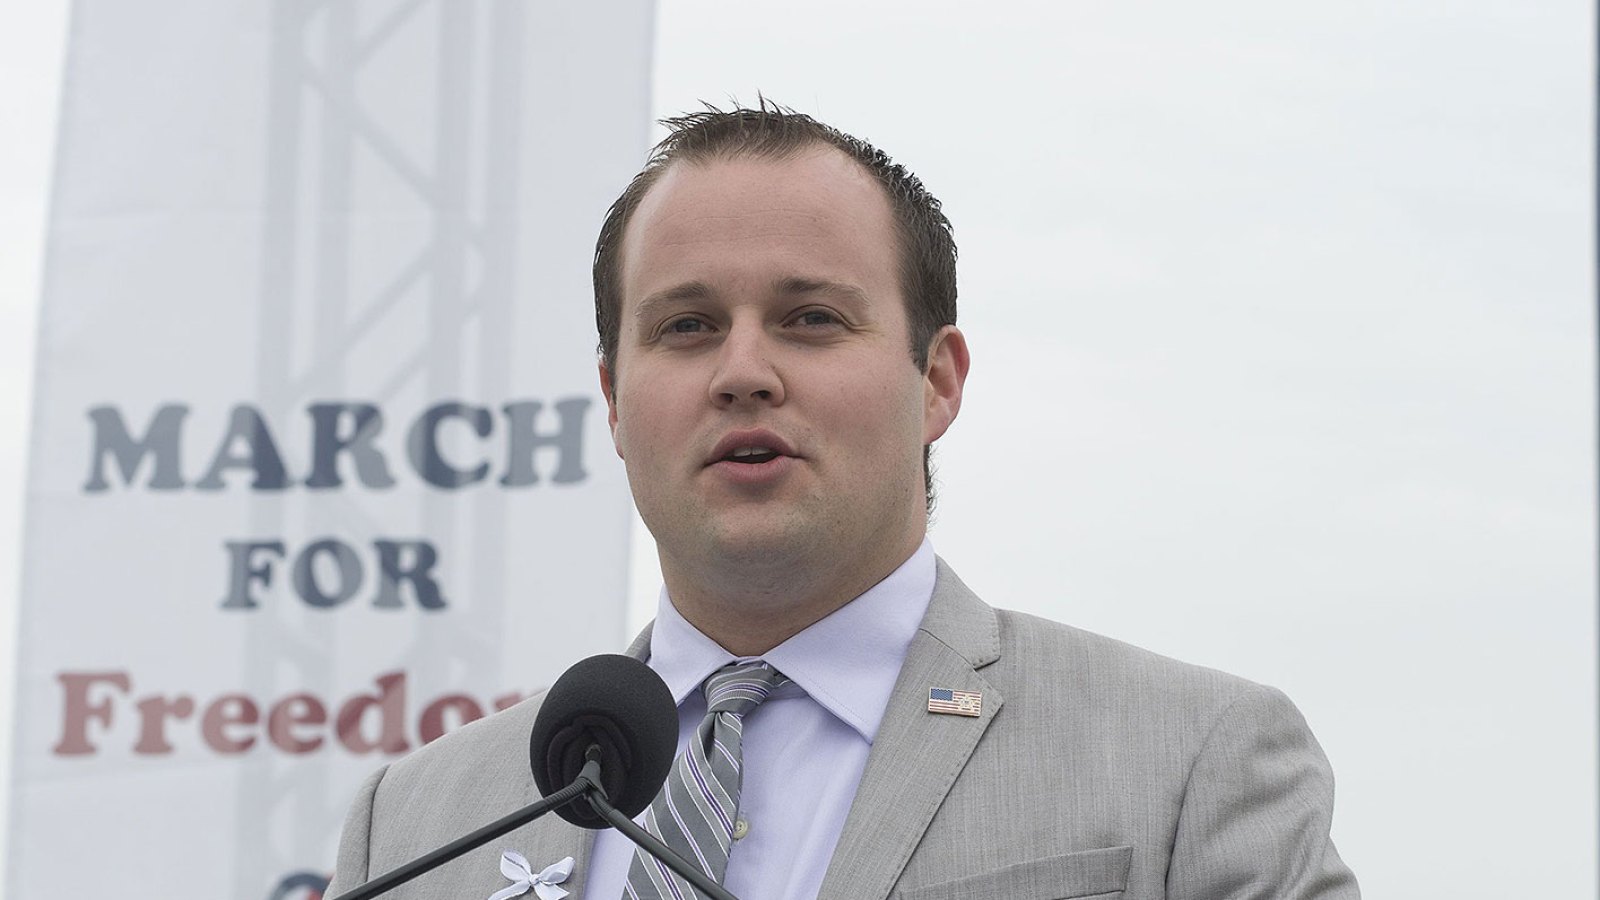 Josh Duggar Cheats on Wife A Comprehensive Timeline of His Scandals From Molestation to Ashley Madison Revelations 2015